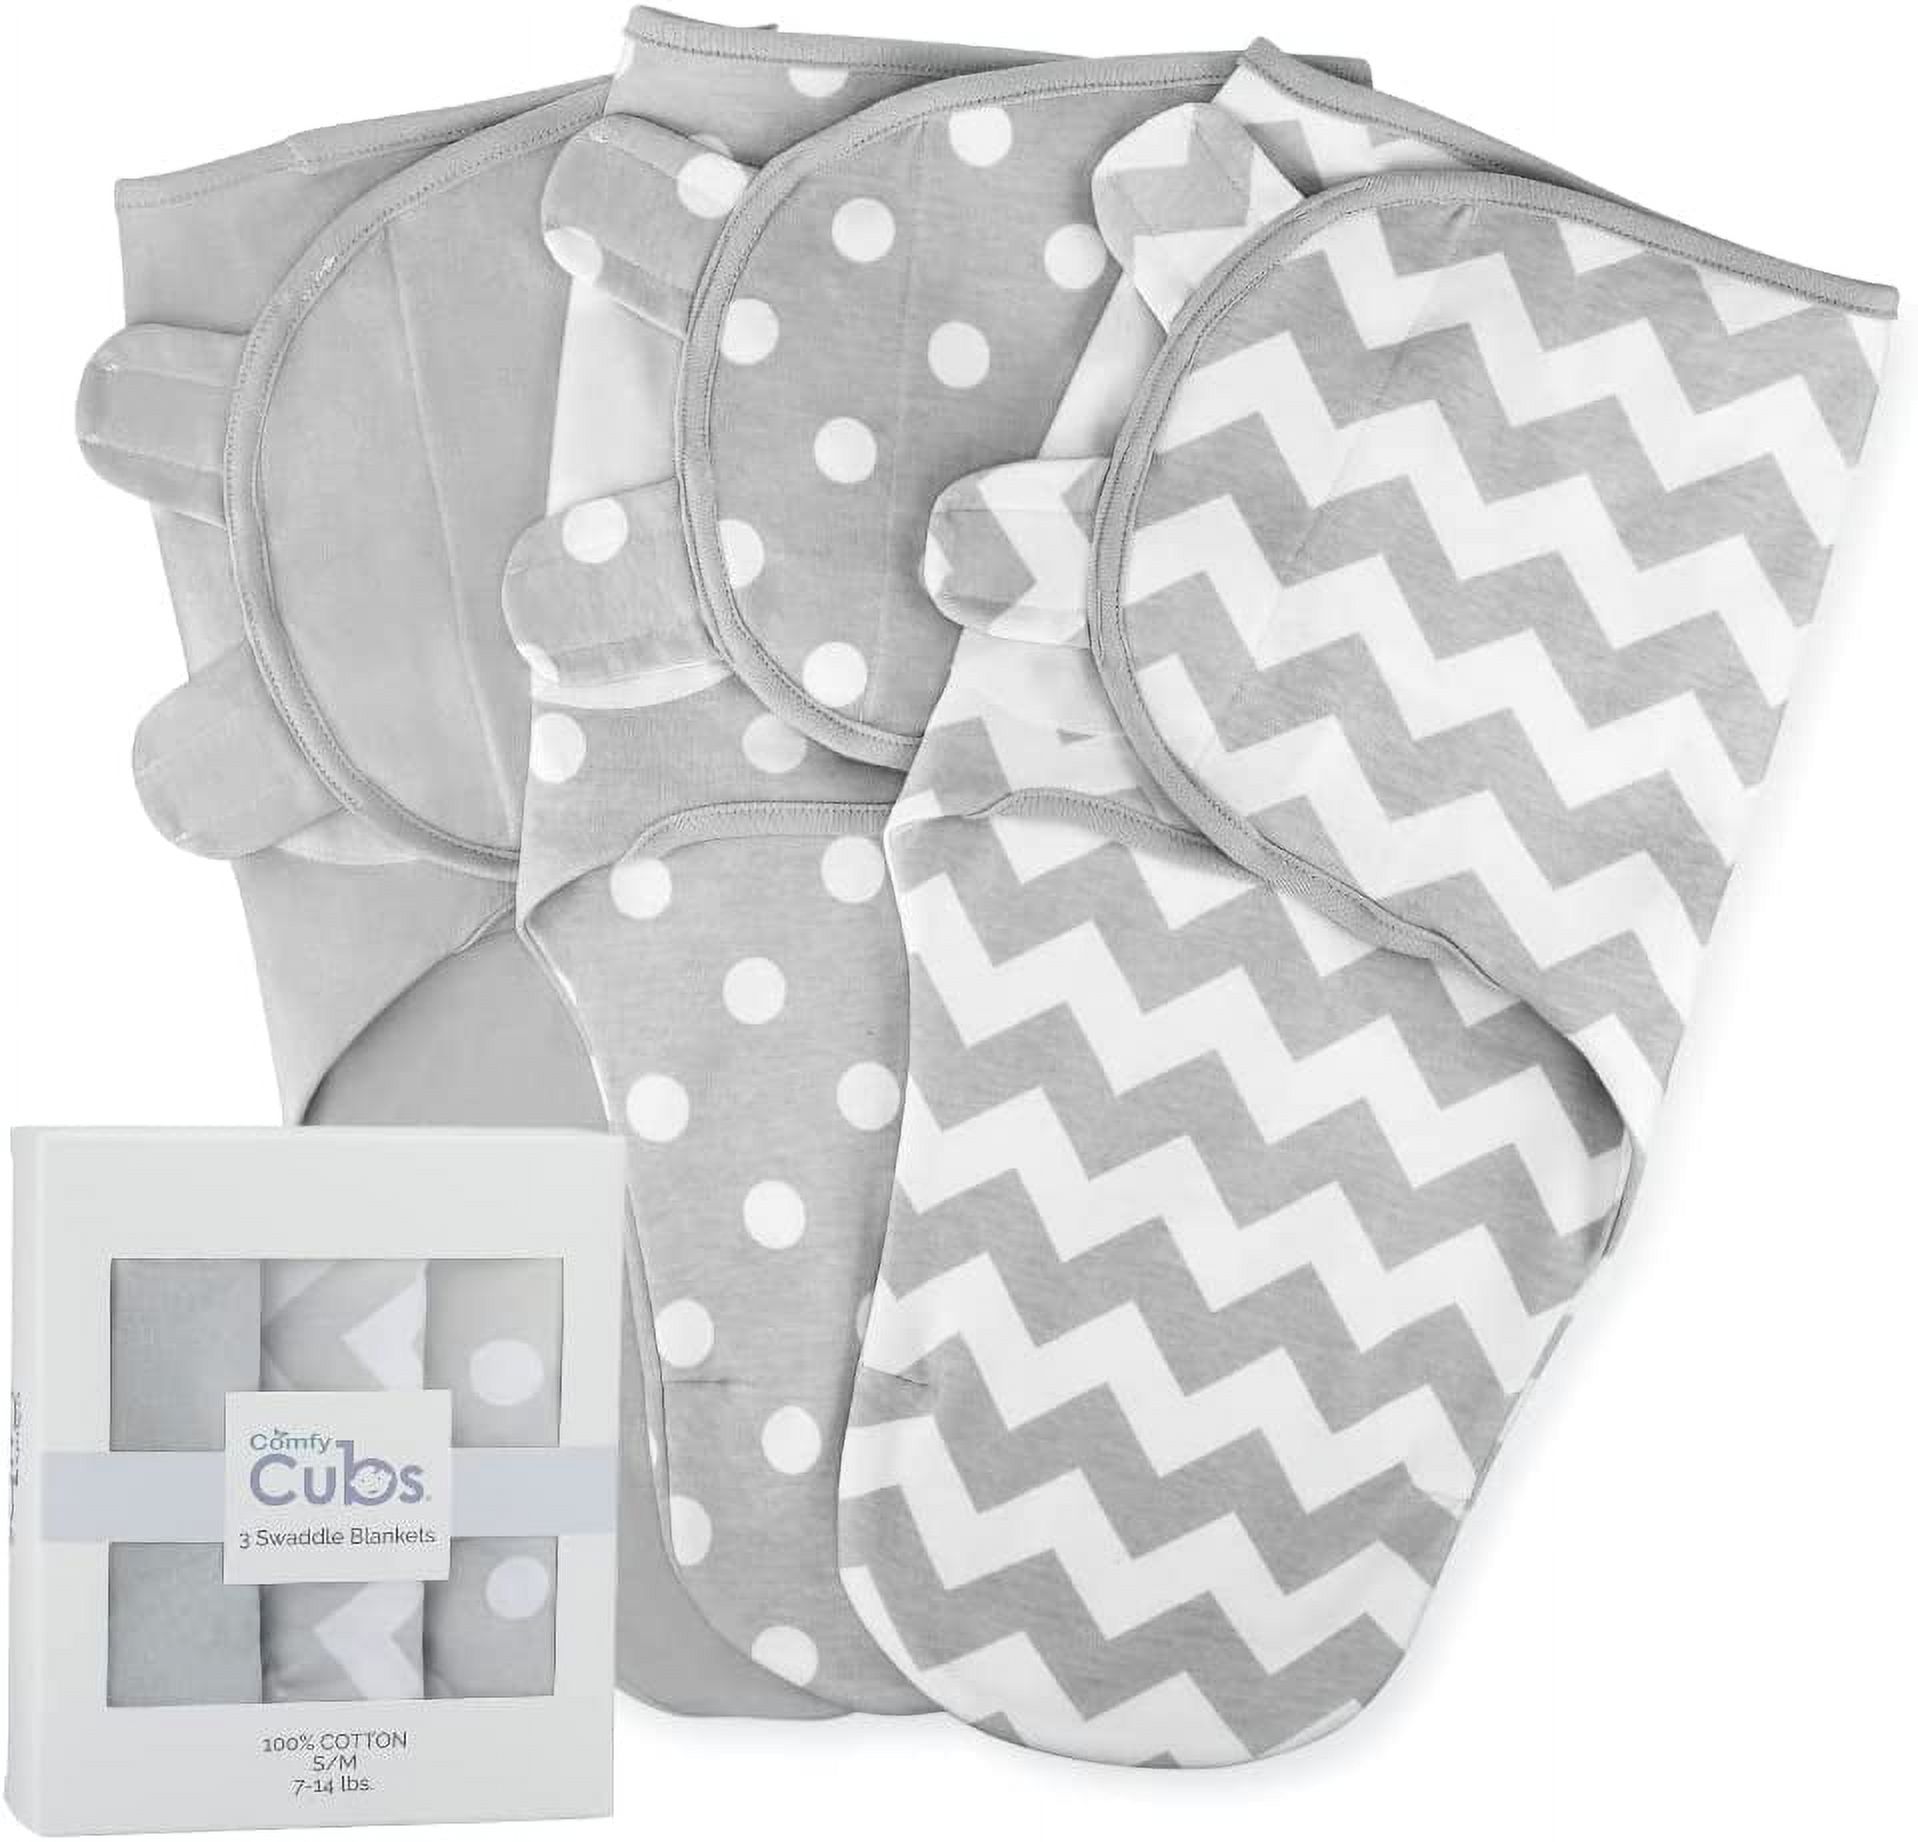 Comfy Cubs Swaddle Blanket Baby Girl Boy Easy Adjustable 3 Pack Infant Sleep Sack Wrap Newborn Babies (Small 0-3 Month, Gray) - image 1 of 8